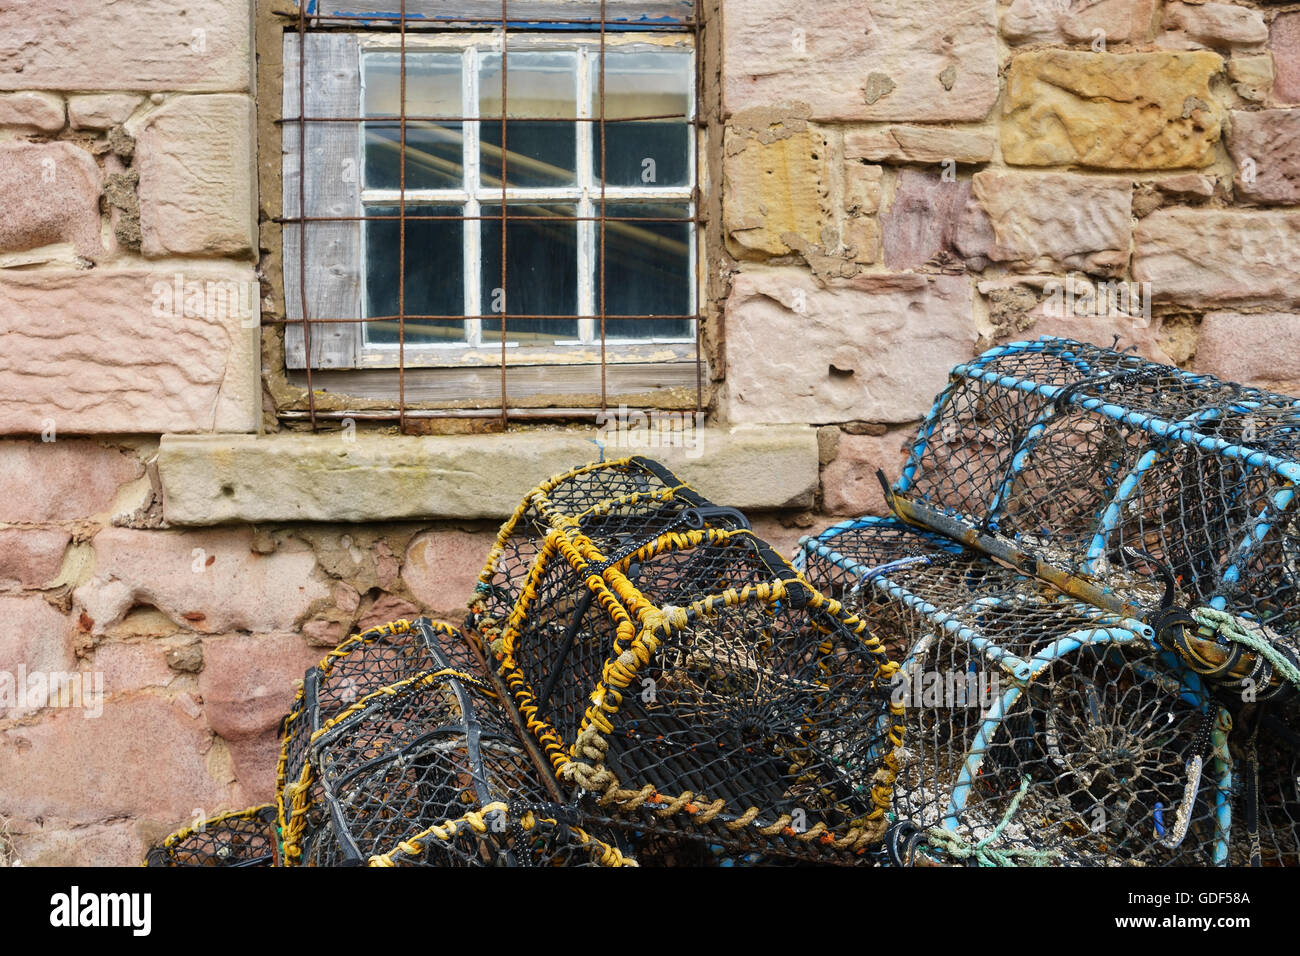 Lobster pots (creels) outside an old fisherman's cottage in Scotland. Stock Photo